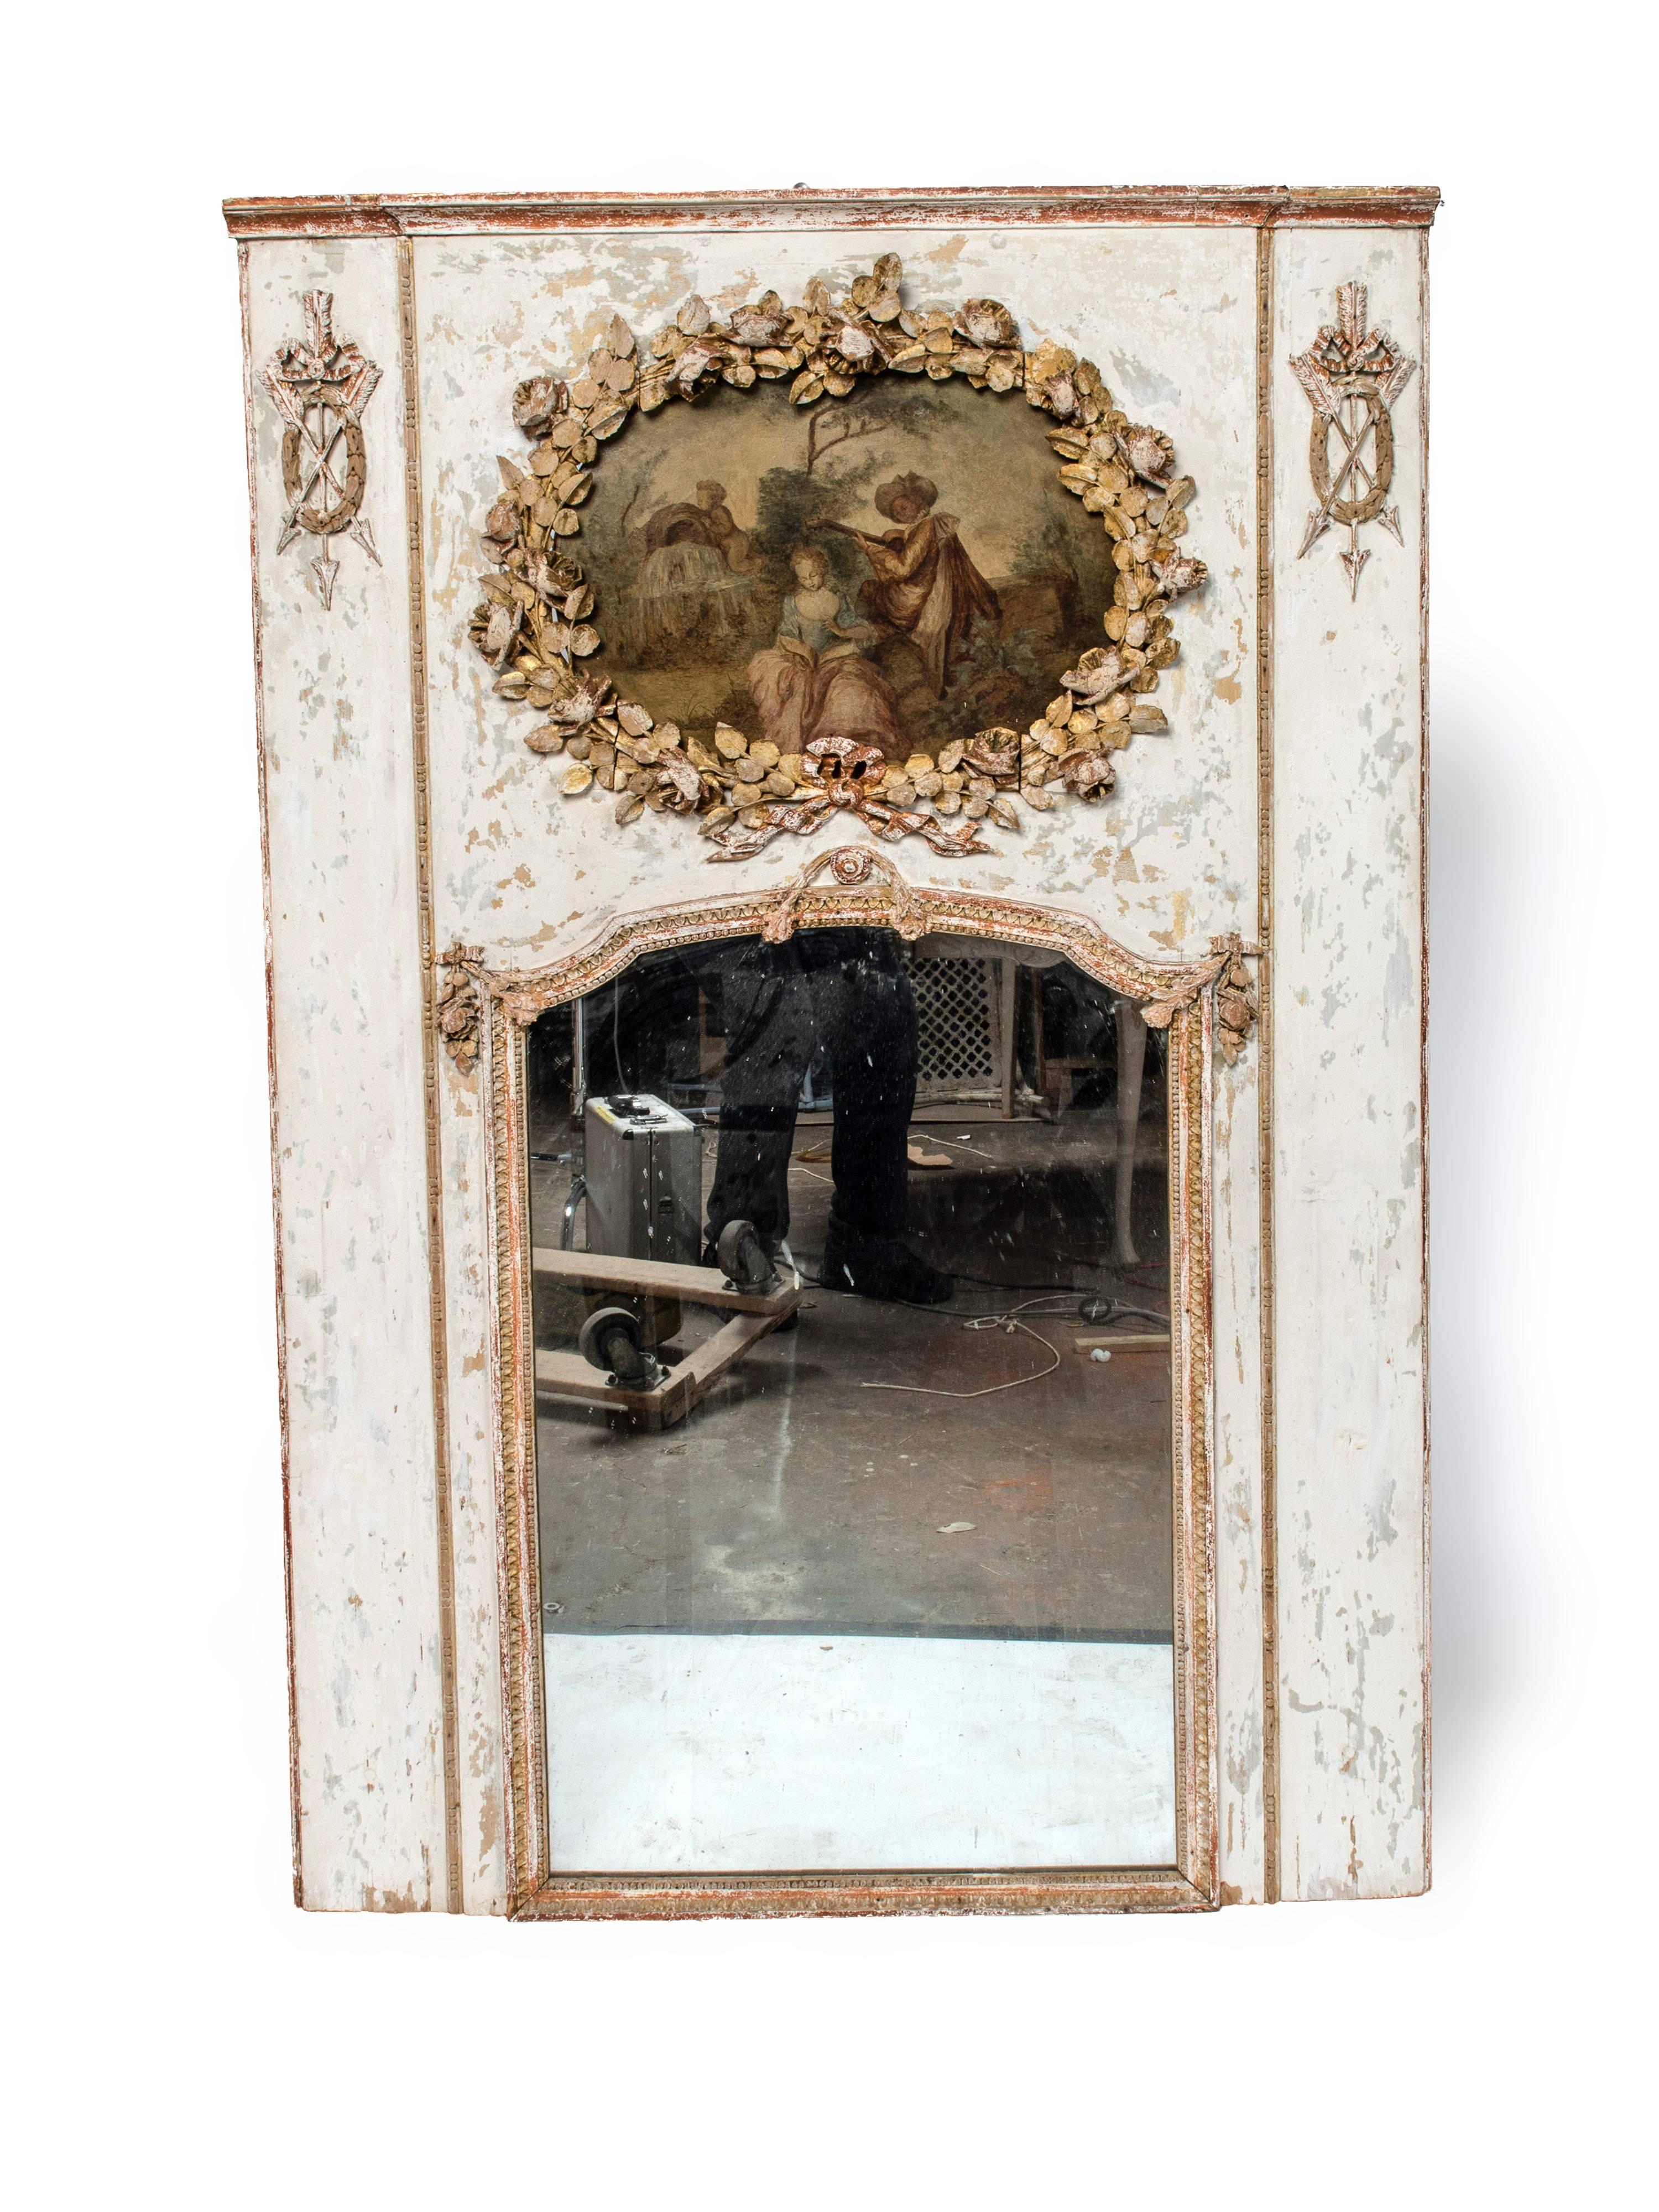 Very decorative gilt and hand-painted Louis XVI trumeau mirror with a hand-painted family scene with father playing a musical instrument, the gilding and paintwork has some wear.